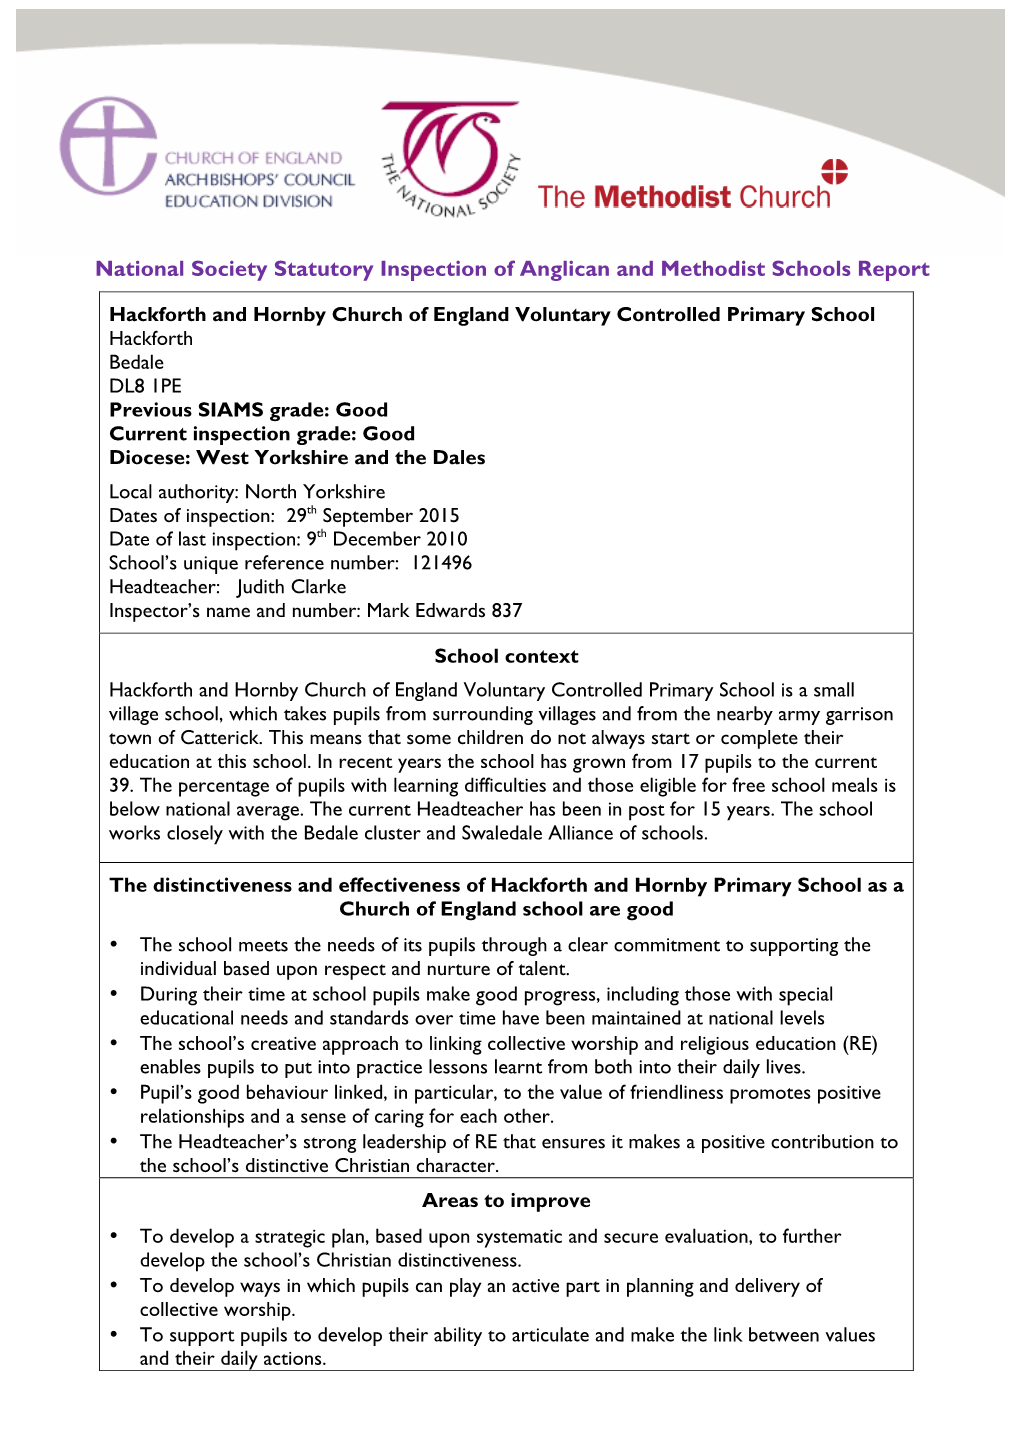 National Society Statutory Inspection of Anglican and Methodist Schools Report